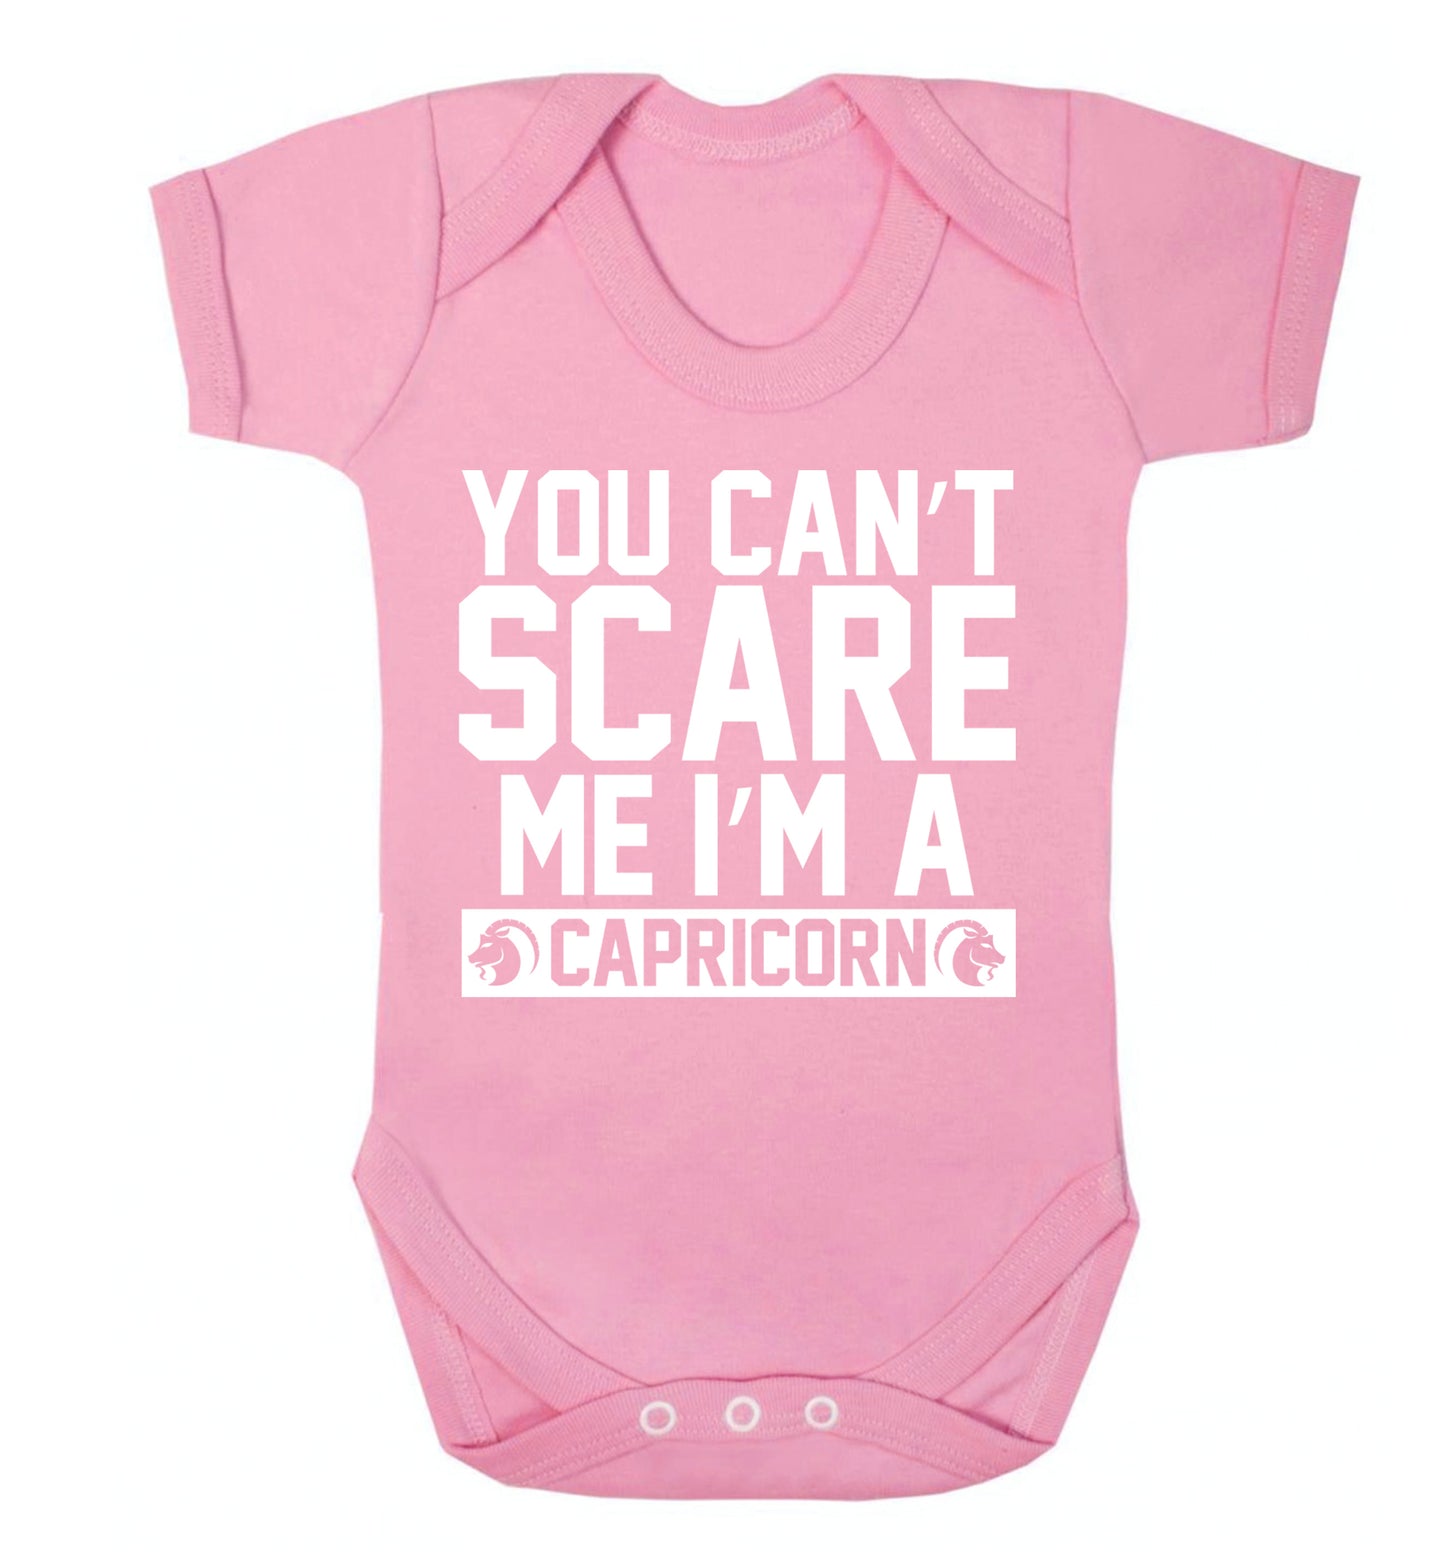 You can't scare me I'm a capricorn Baby Vest pale pink 18-24 months